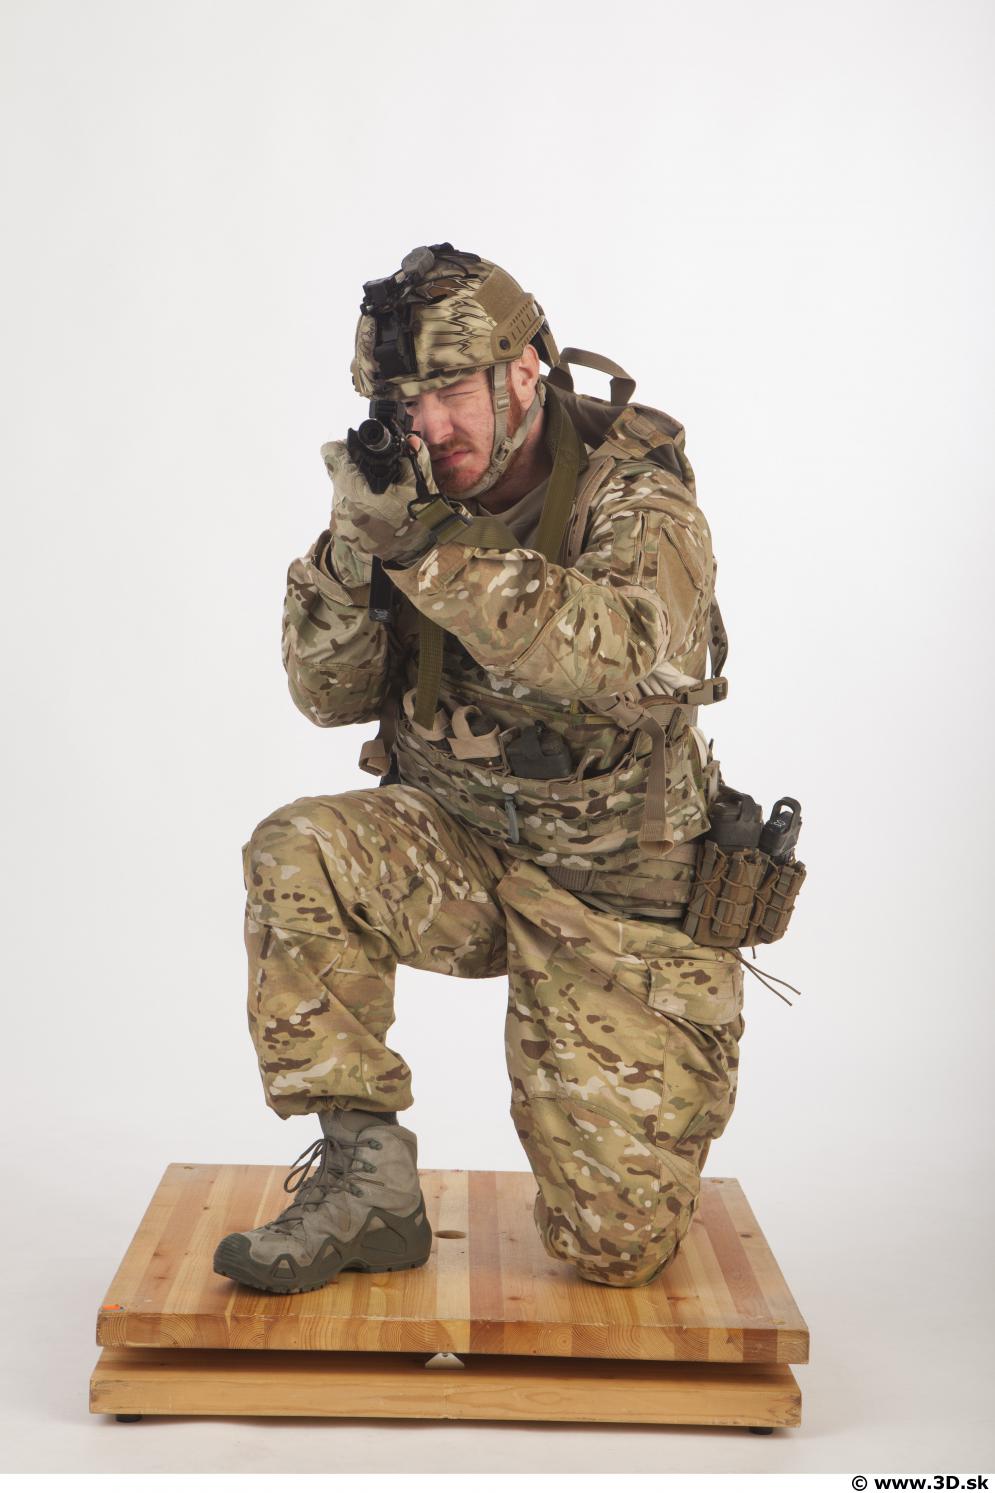 Image from Free Samples / May 2018 - 0072_soldier_in_american_army_military_uniform_0072.jpg